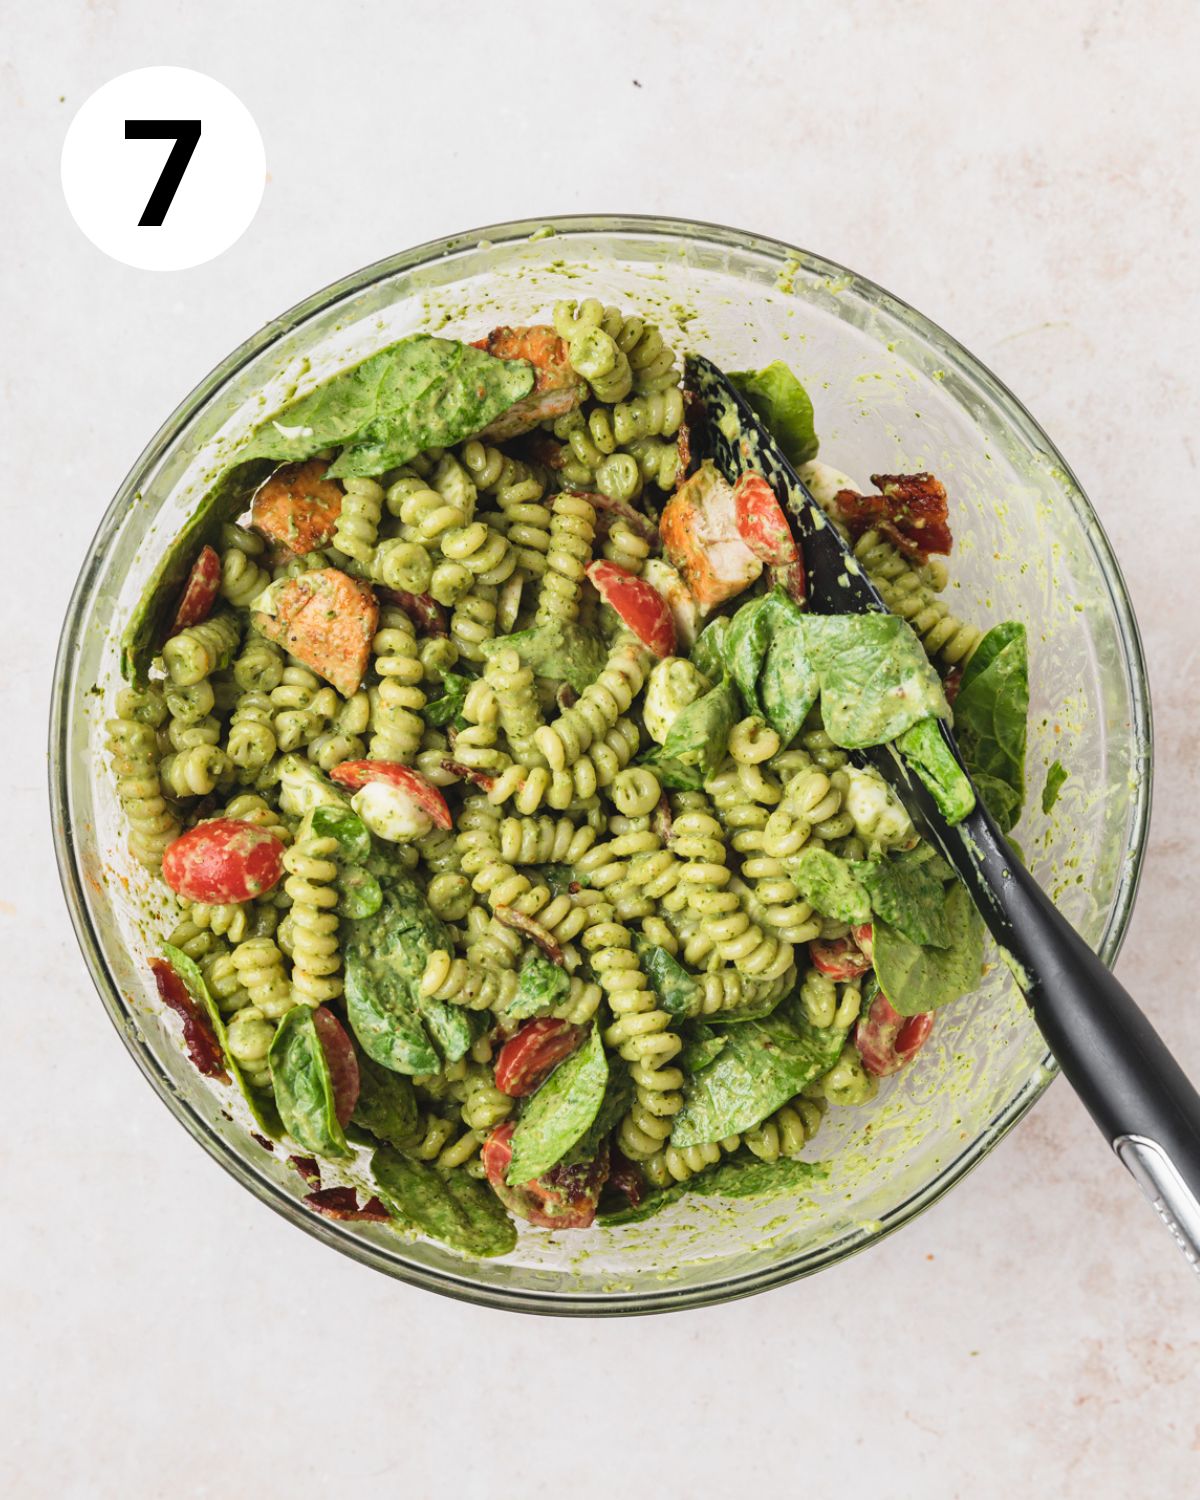 chicken pesto pasta salad mixed together in bowl.